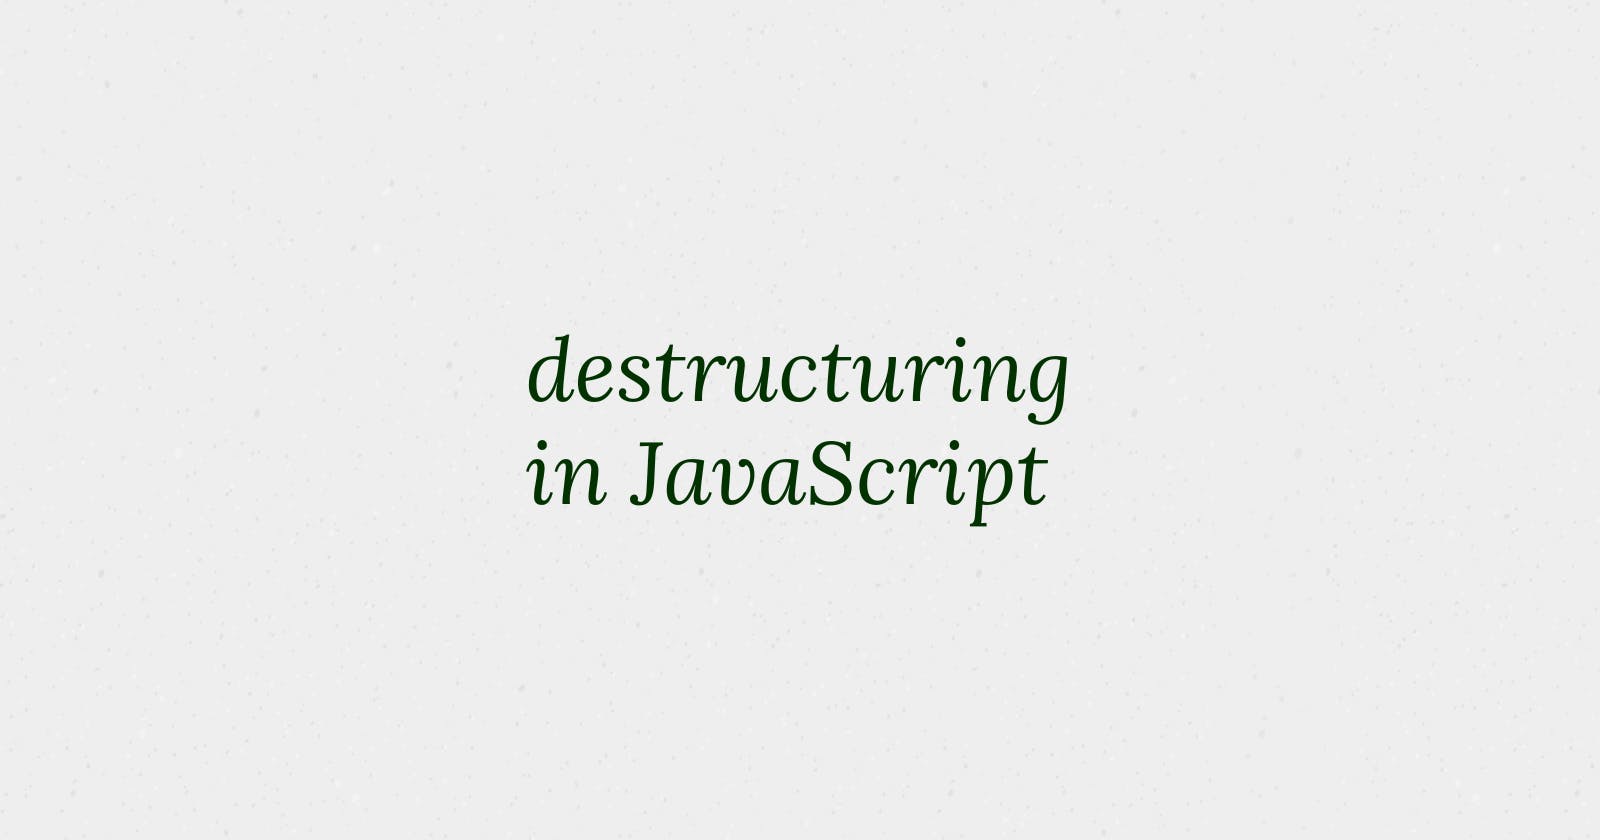 Array & Object Destructuring in JavaScript